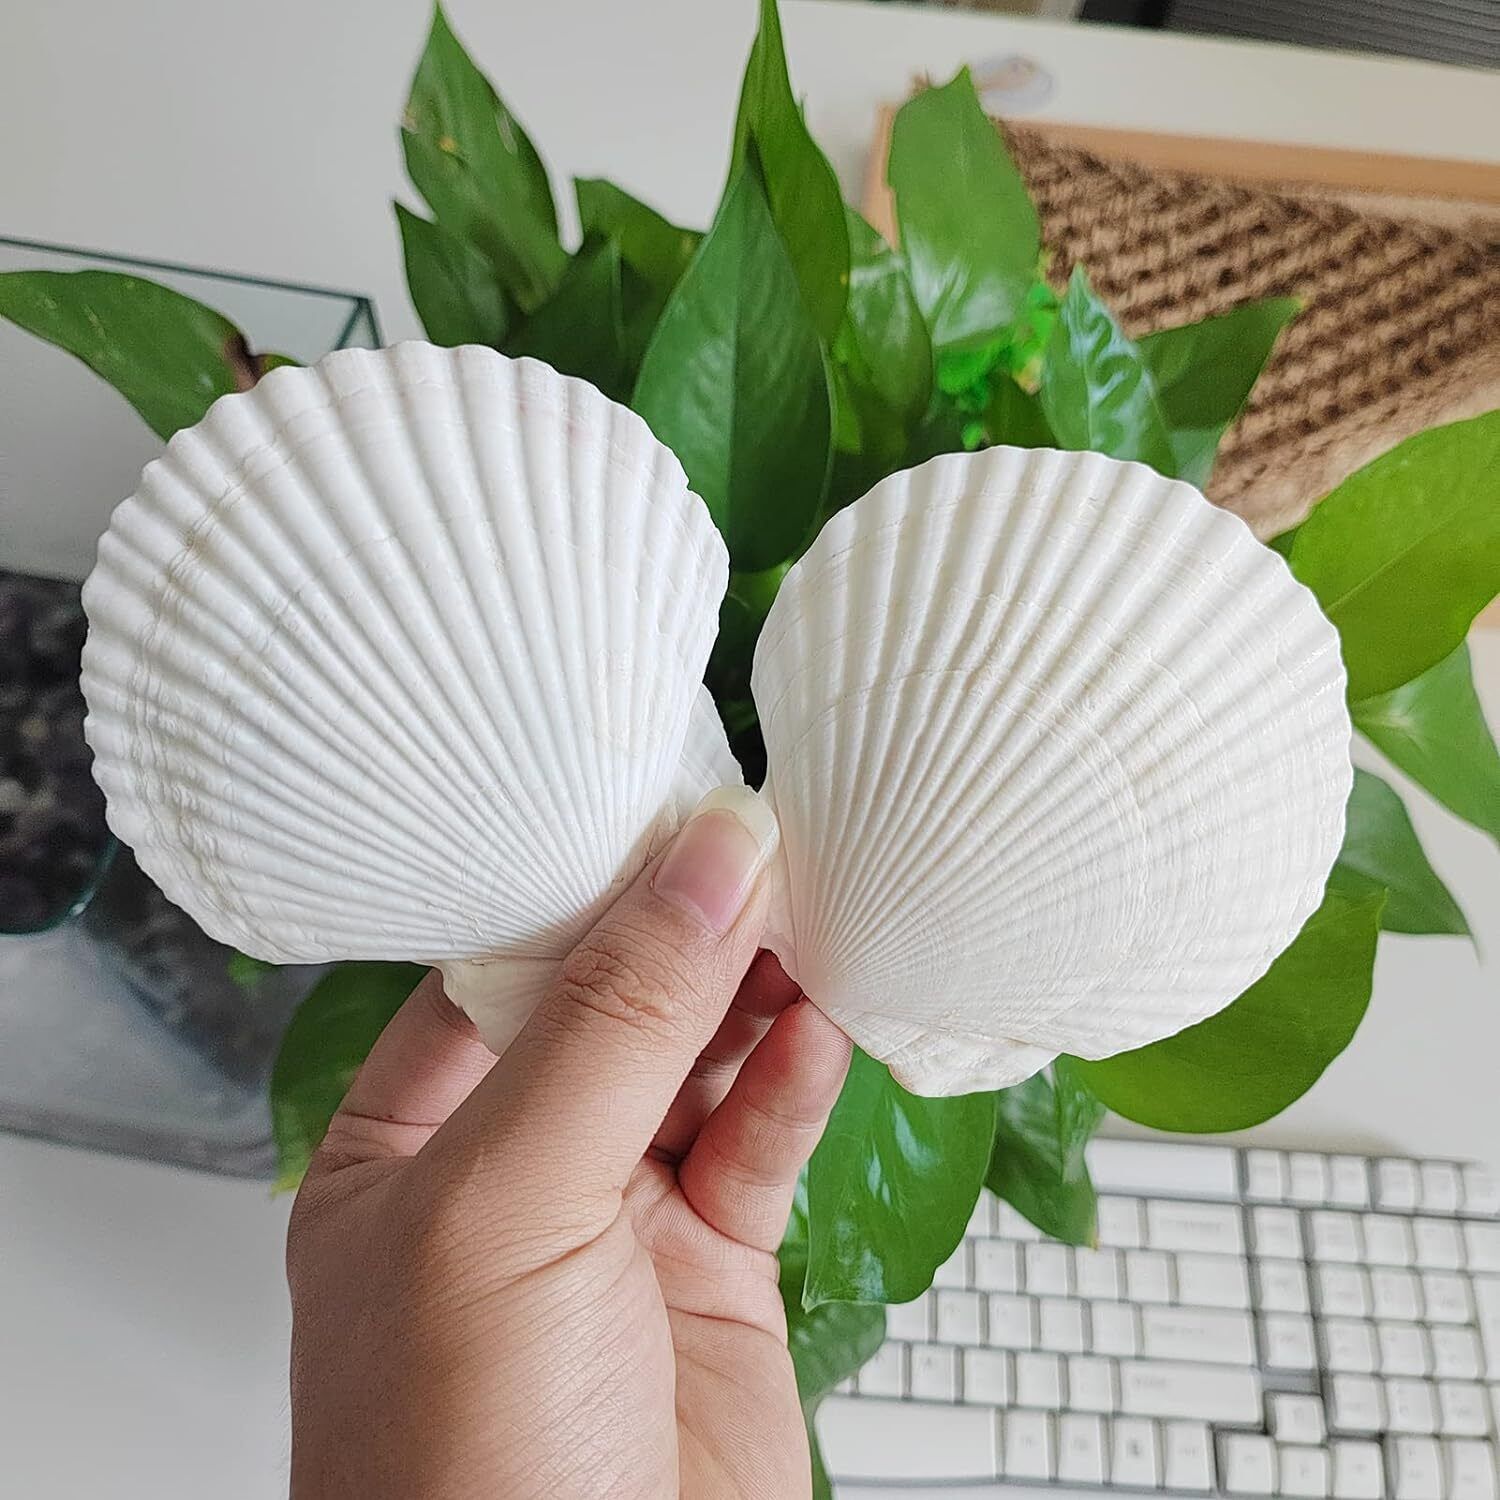 16PCS Shells for Crafts 3-4 White Scallop Shells for Baking 16pcs 3-4